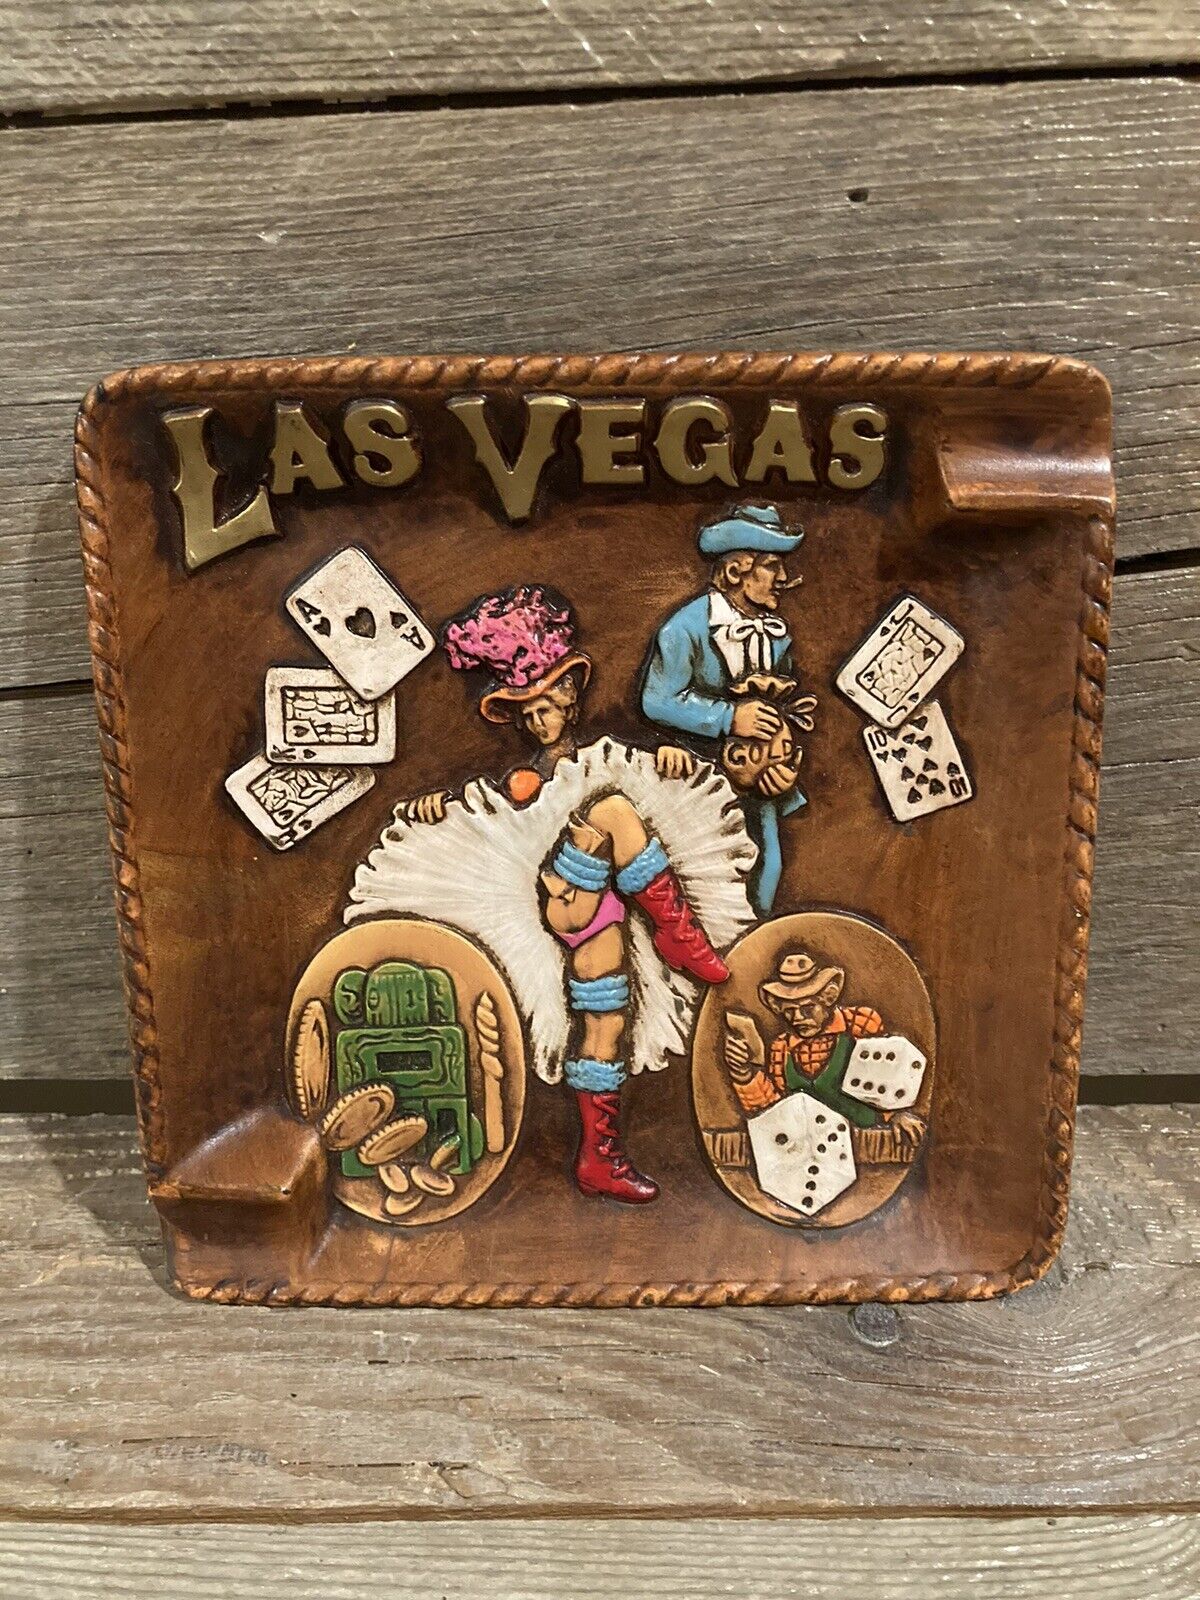 Vtg Las Vegas Old Time Wild West Lady Casino Collectible Ashtray or Plate